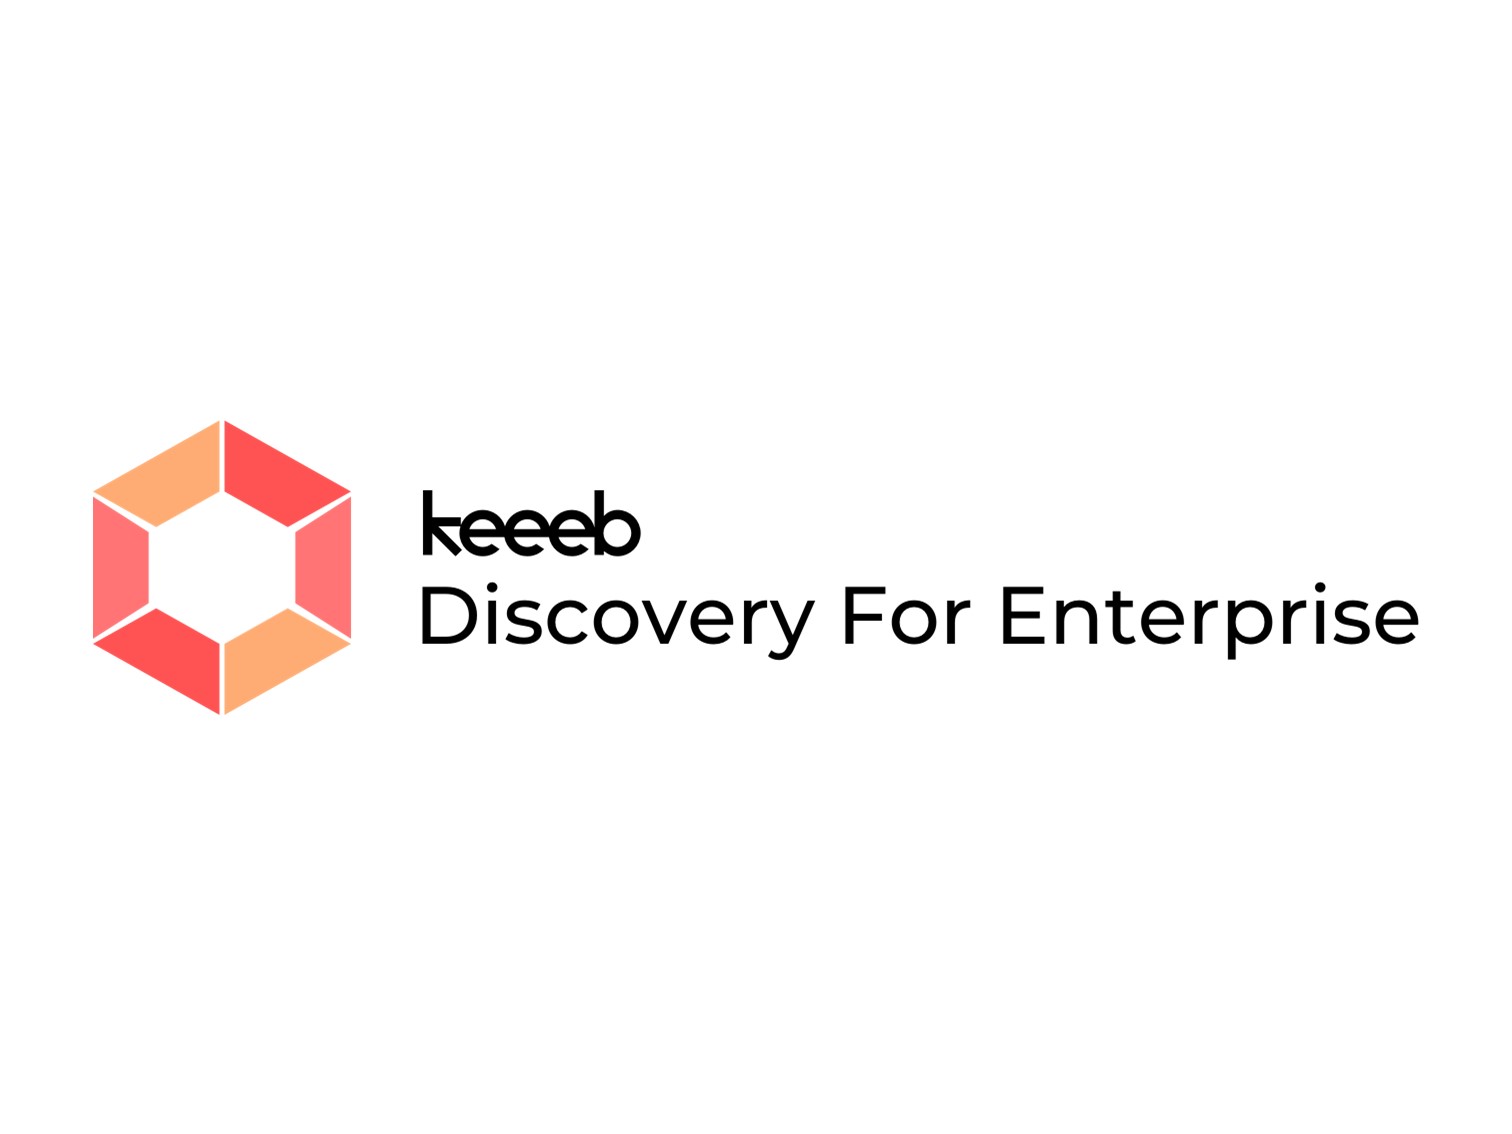 Keeeb Discovery For Enterprise